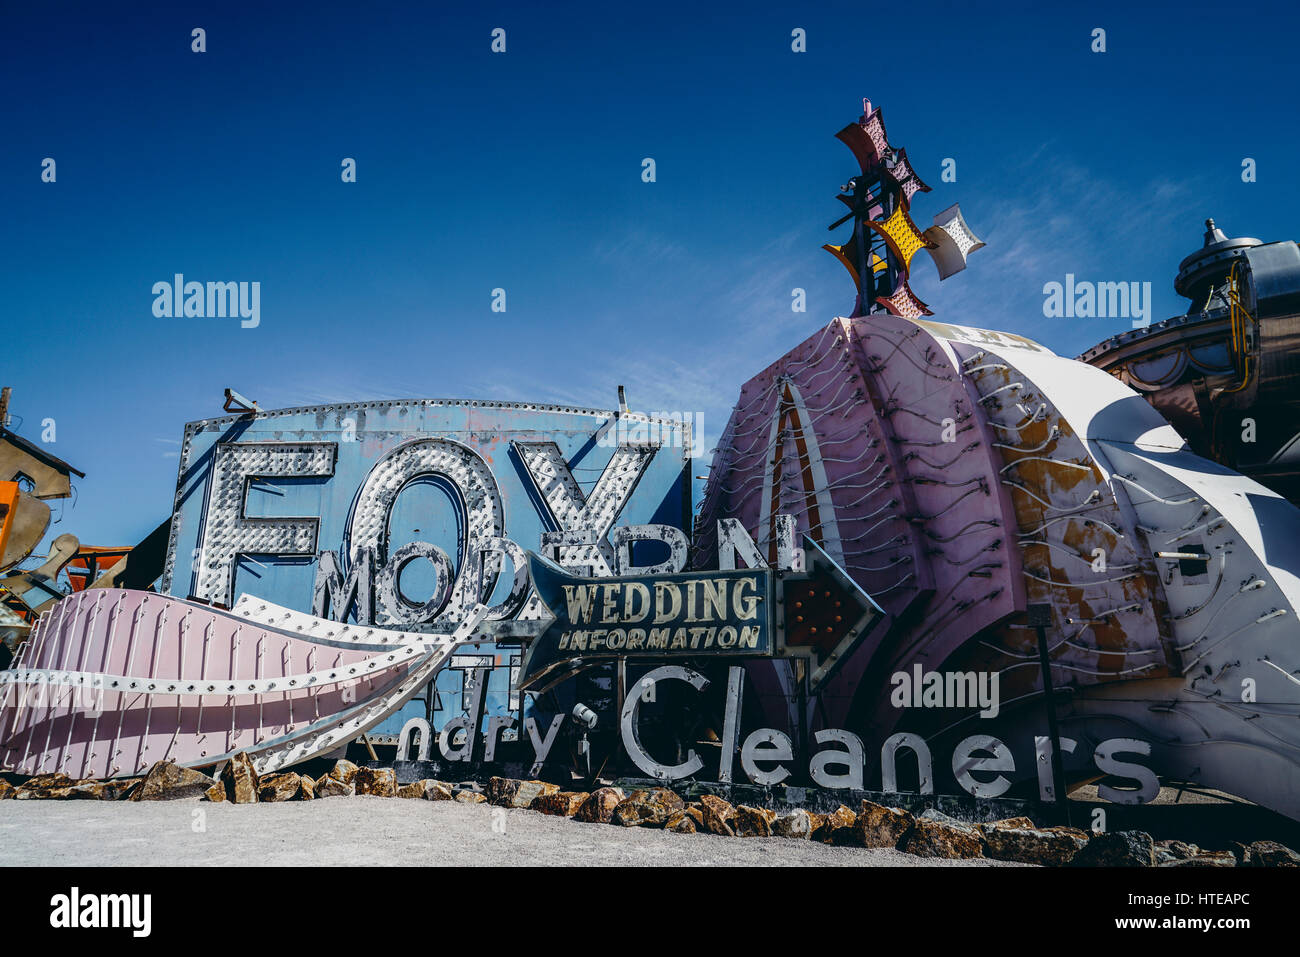 The Neon Boneyard museum in Las Vegas, United States of America. The museum shows over 150 signs and some world-famous signs of Las Vegas. Stock Photo